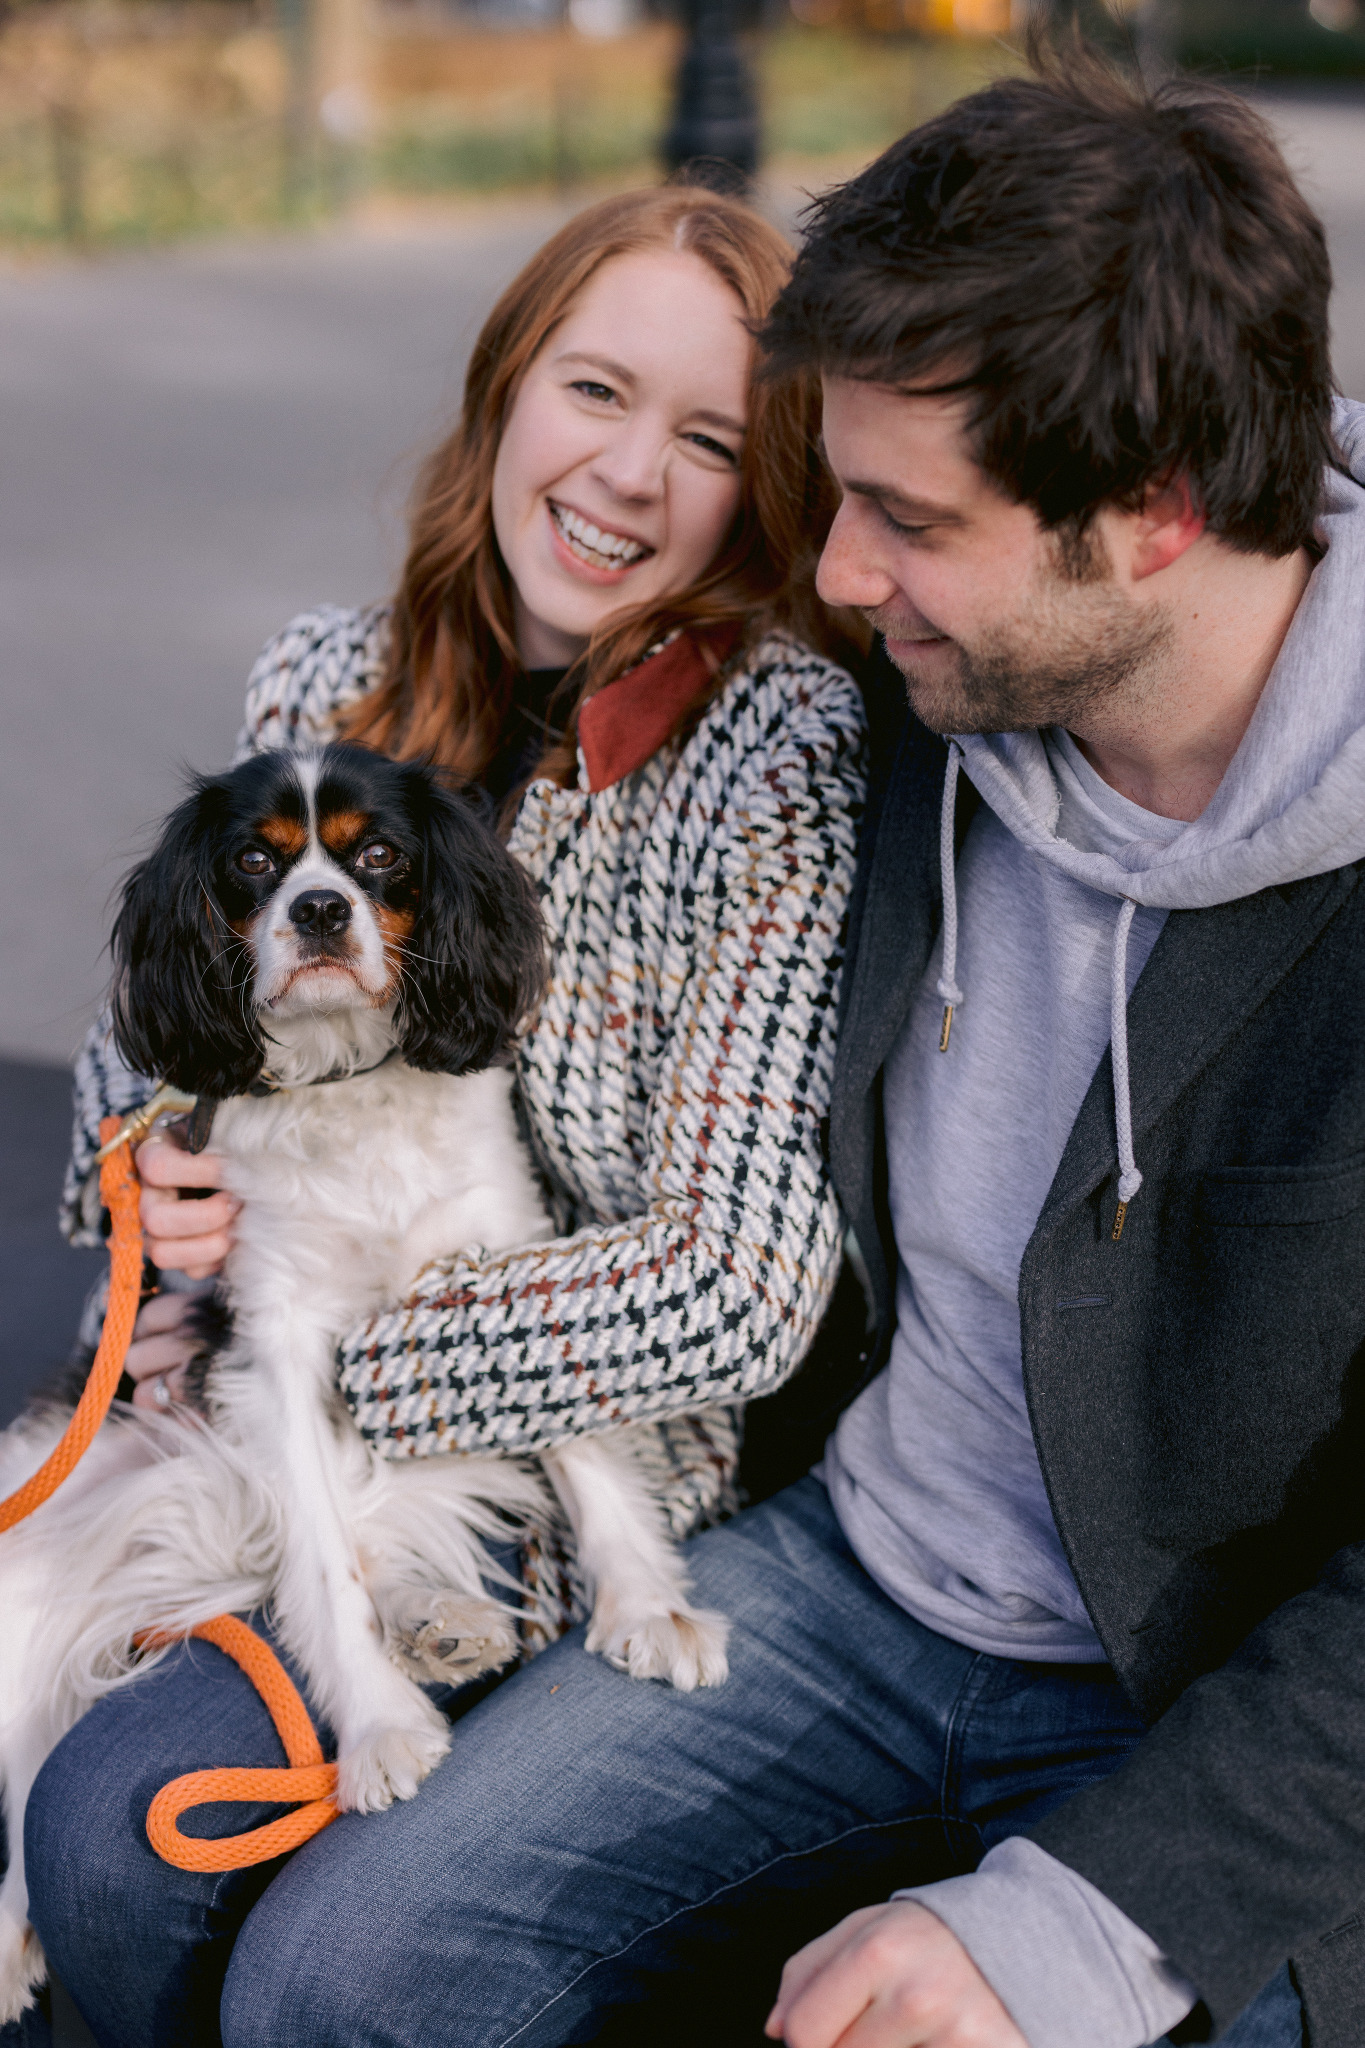 The engaged couple's dog is sitting on the fiance's lap while it's looking at the camera. Engagement session with pets photo by Jenny Fu Studio.